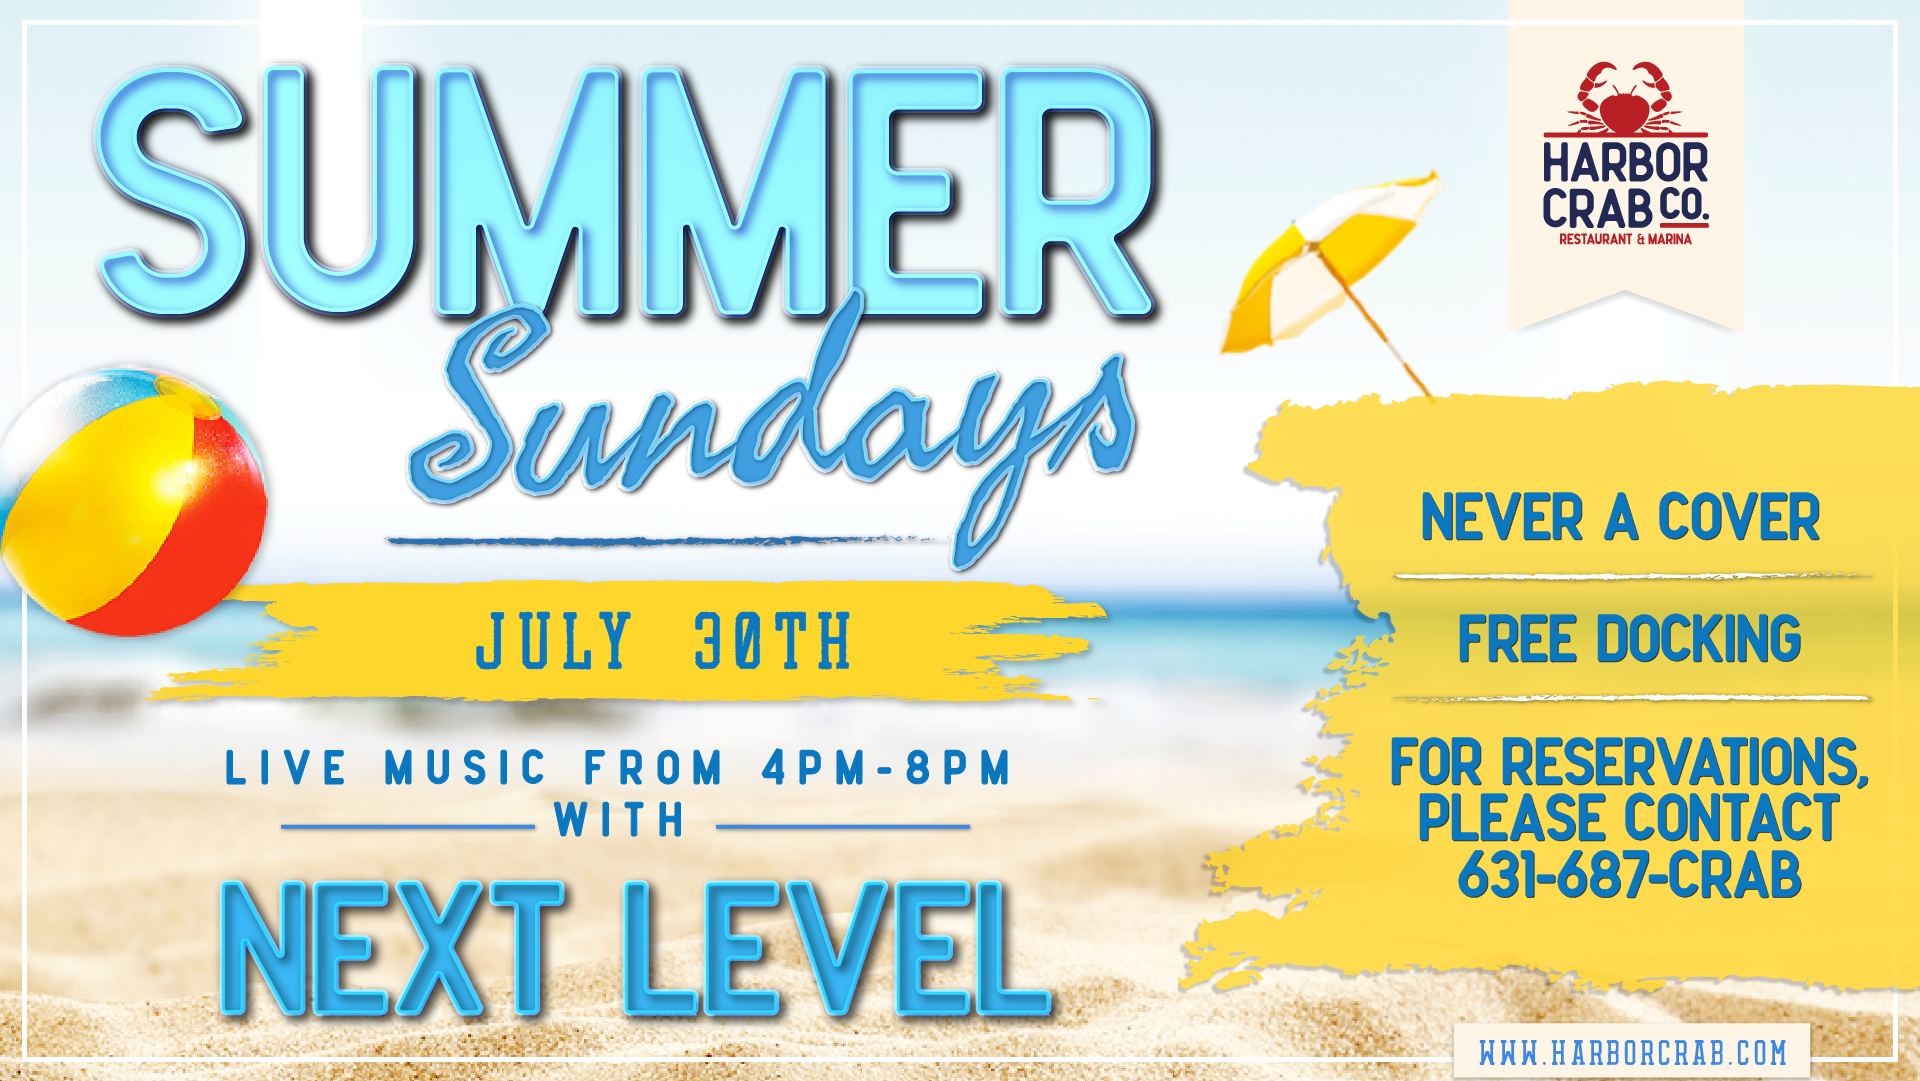 Summer Sunday with Next Level on July 30th at 4pm